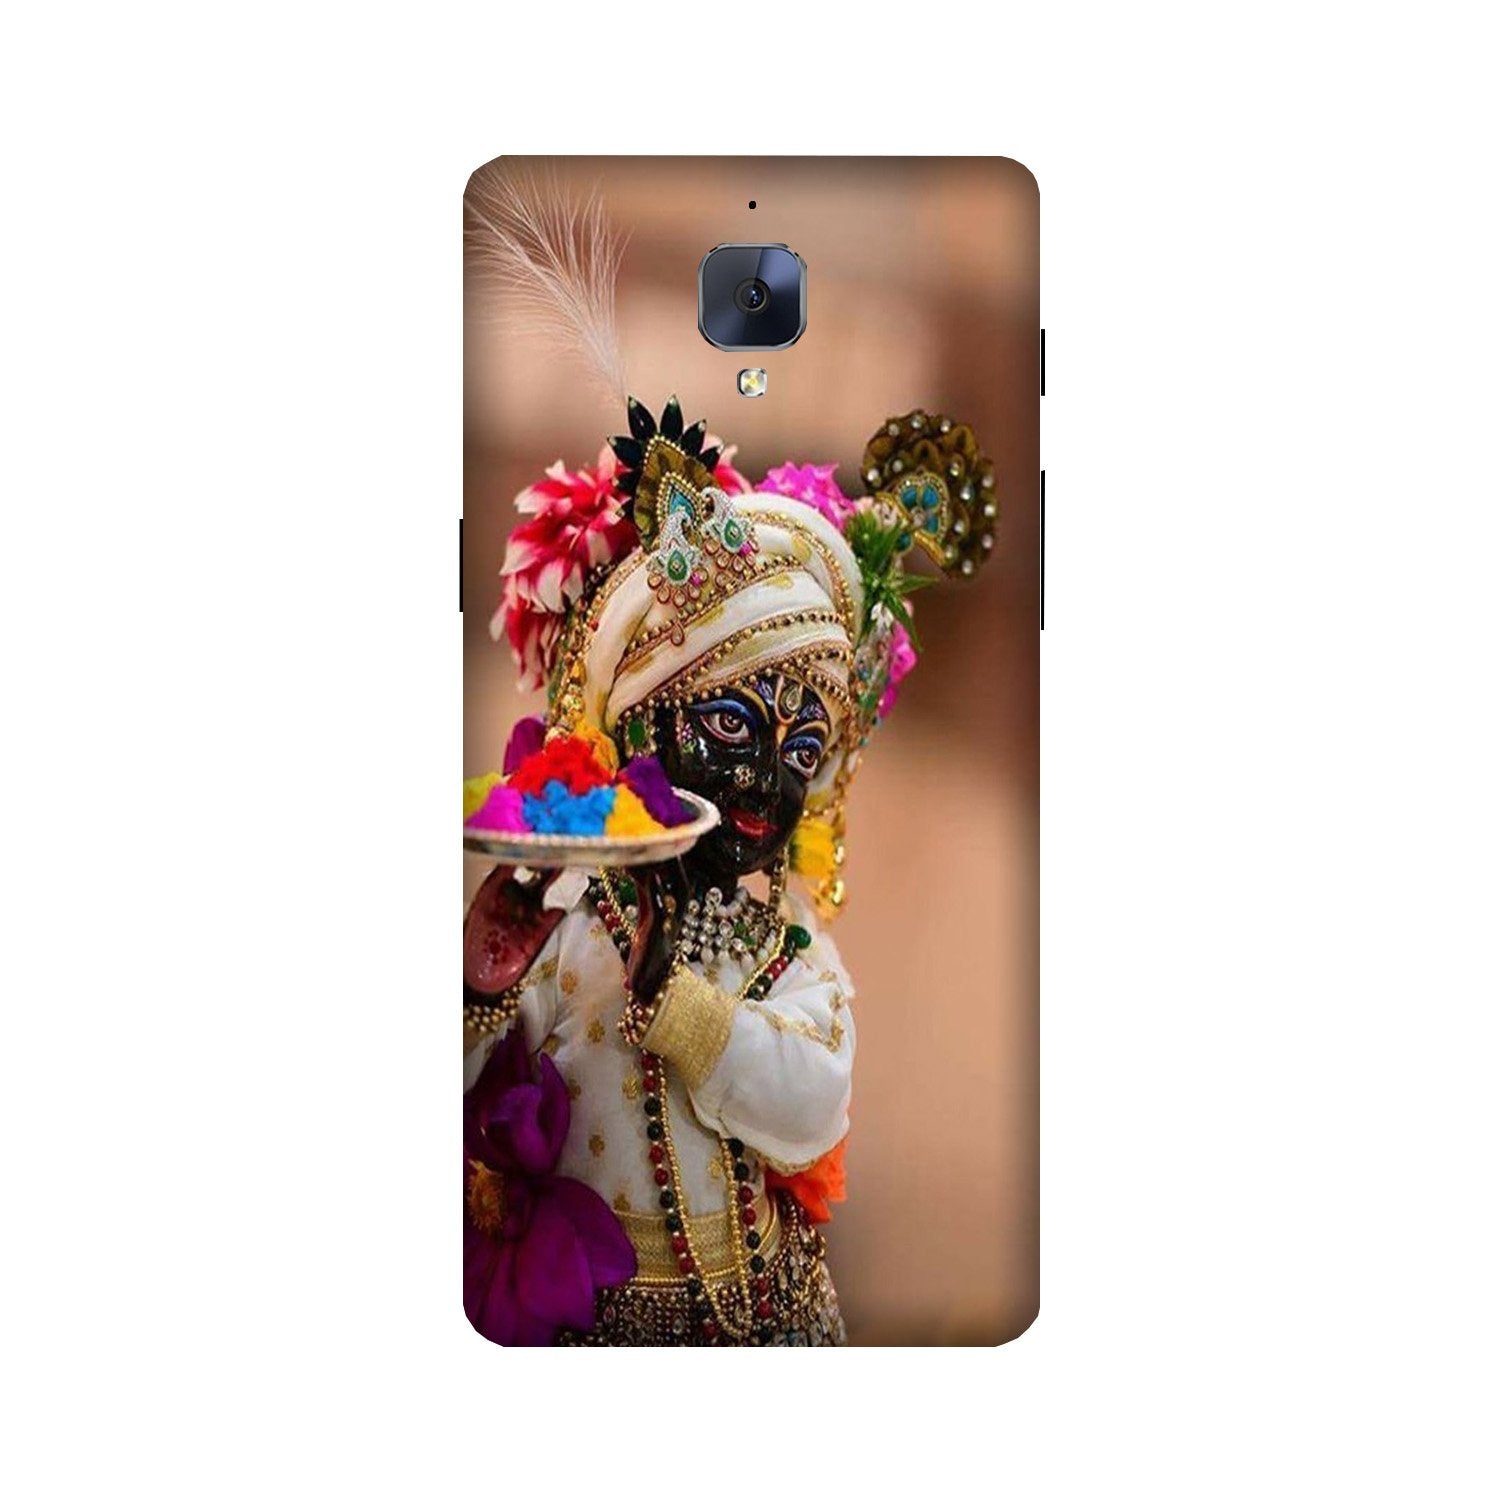 Lord Krishna2 Case for OnePlus 3/ 3T